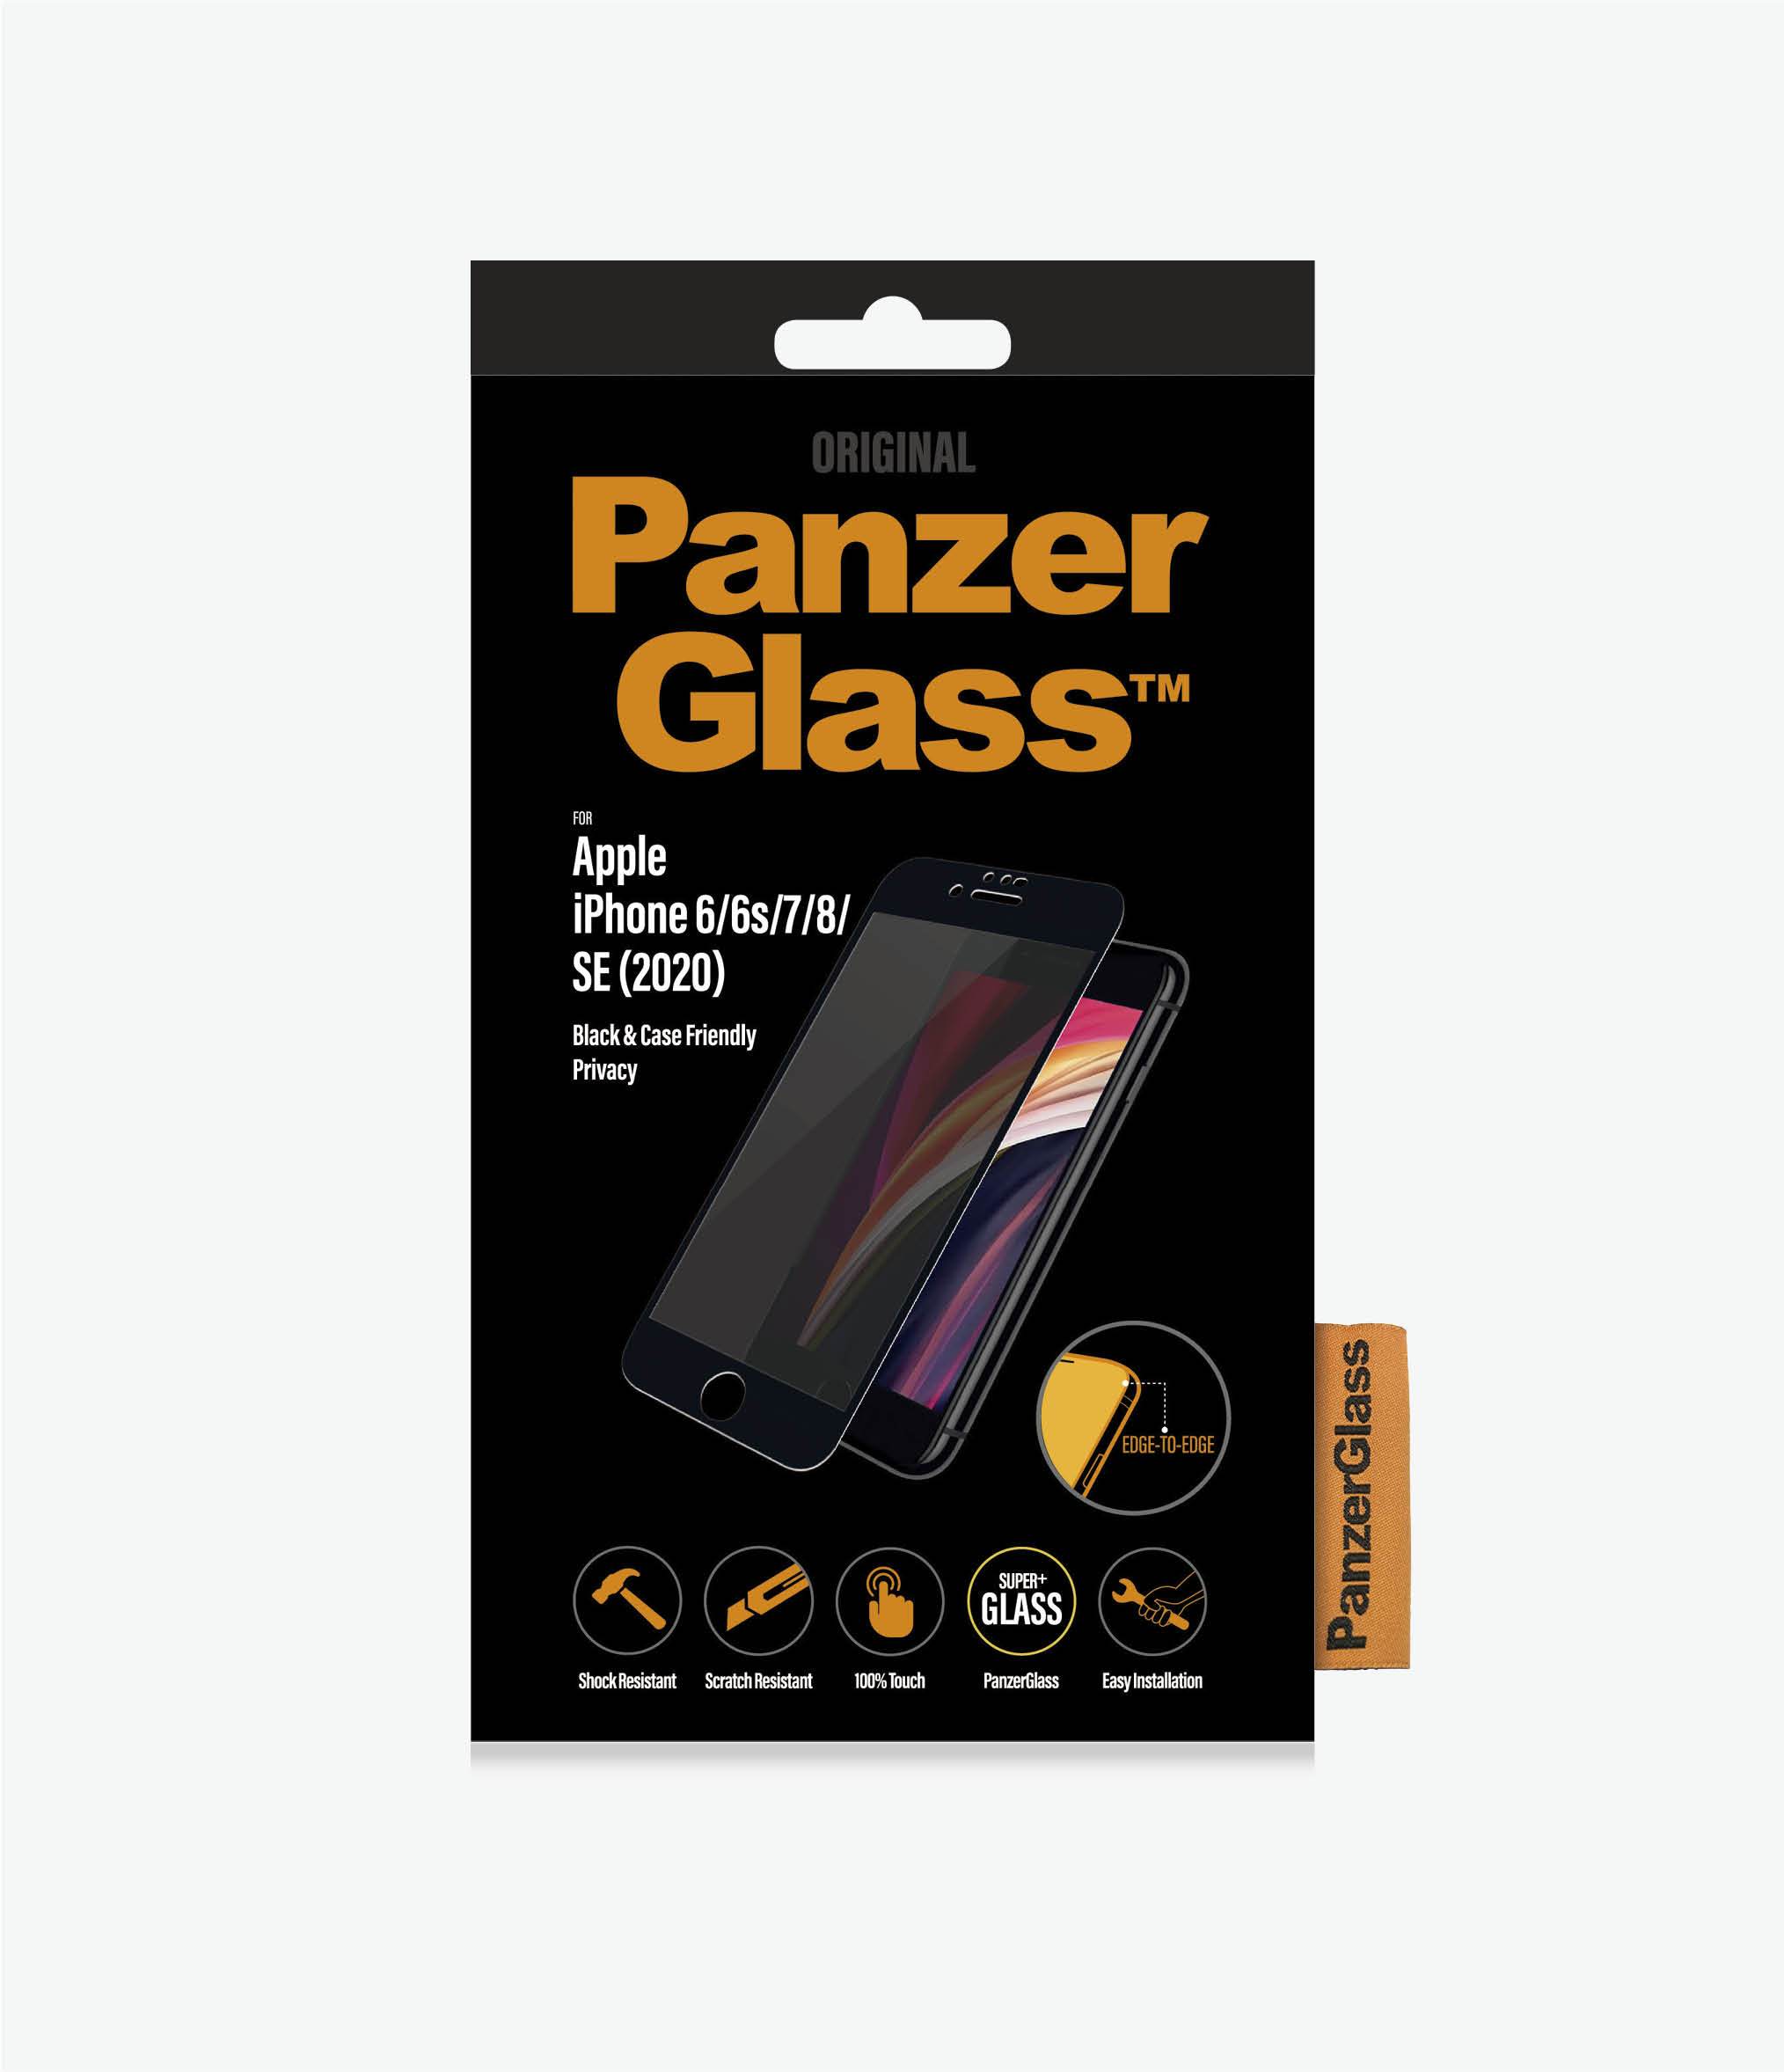 PanzerGlass™ Apple iPhone 6/6s/7/8/SE (2020) - Black Privacy (P2679) - Screen Protector - Privacy filter, Anti-glare coating, Blue light reduction